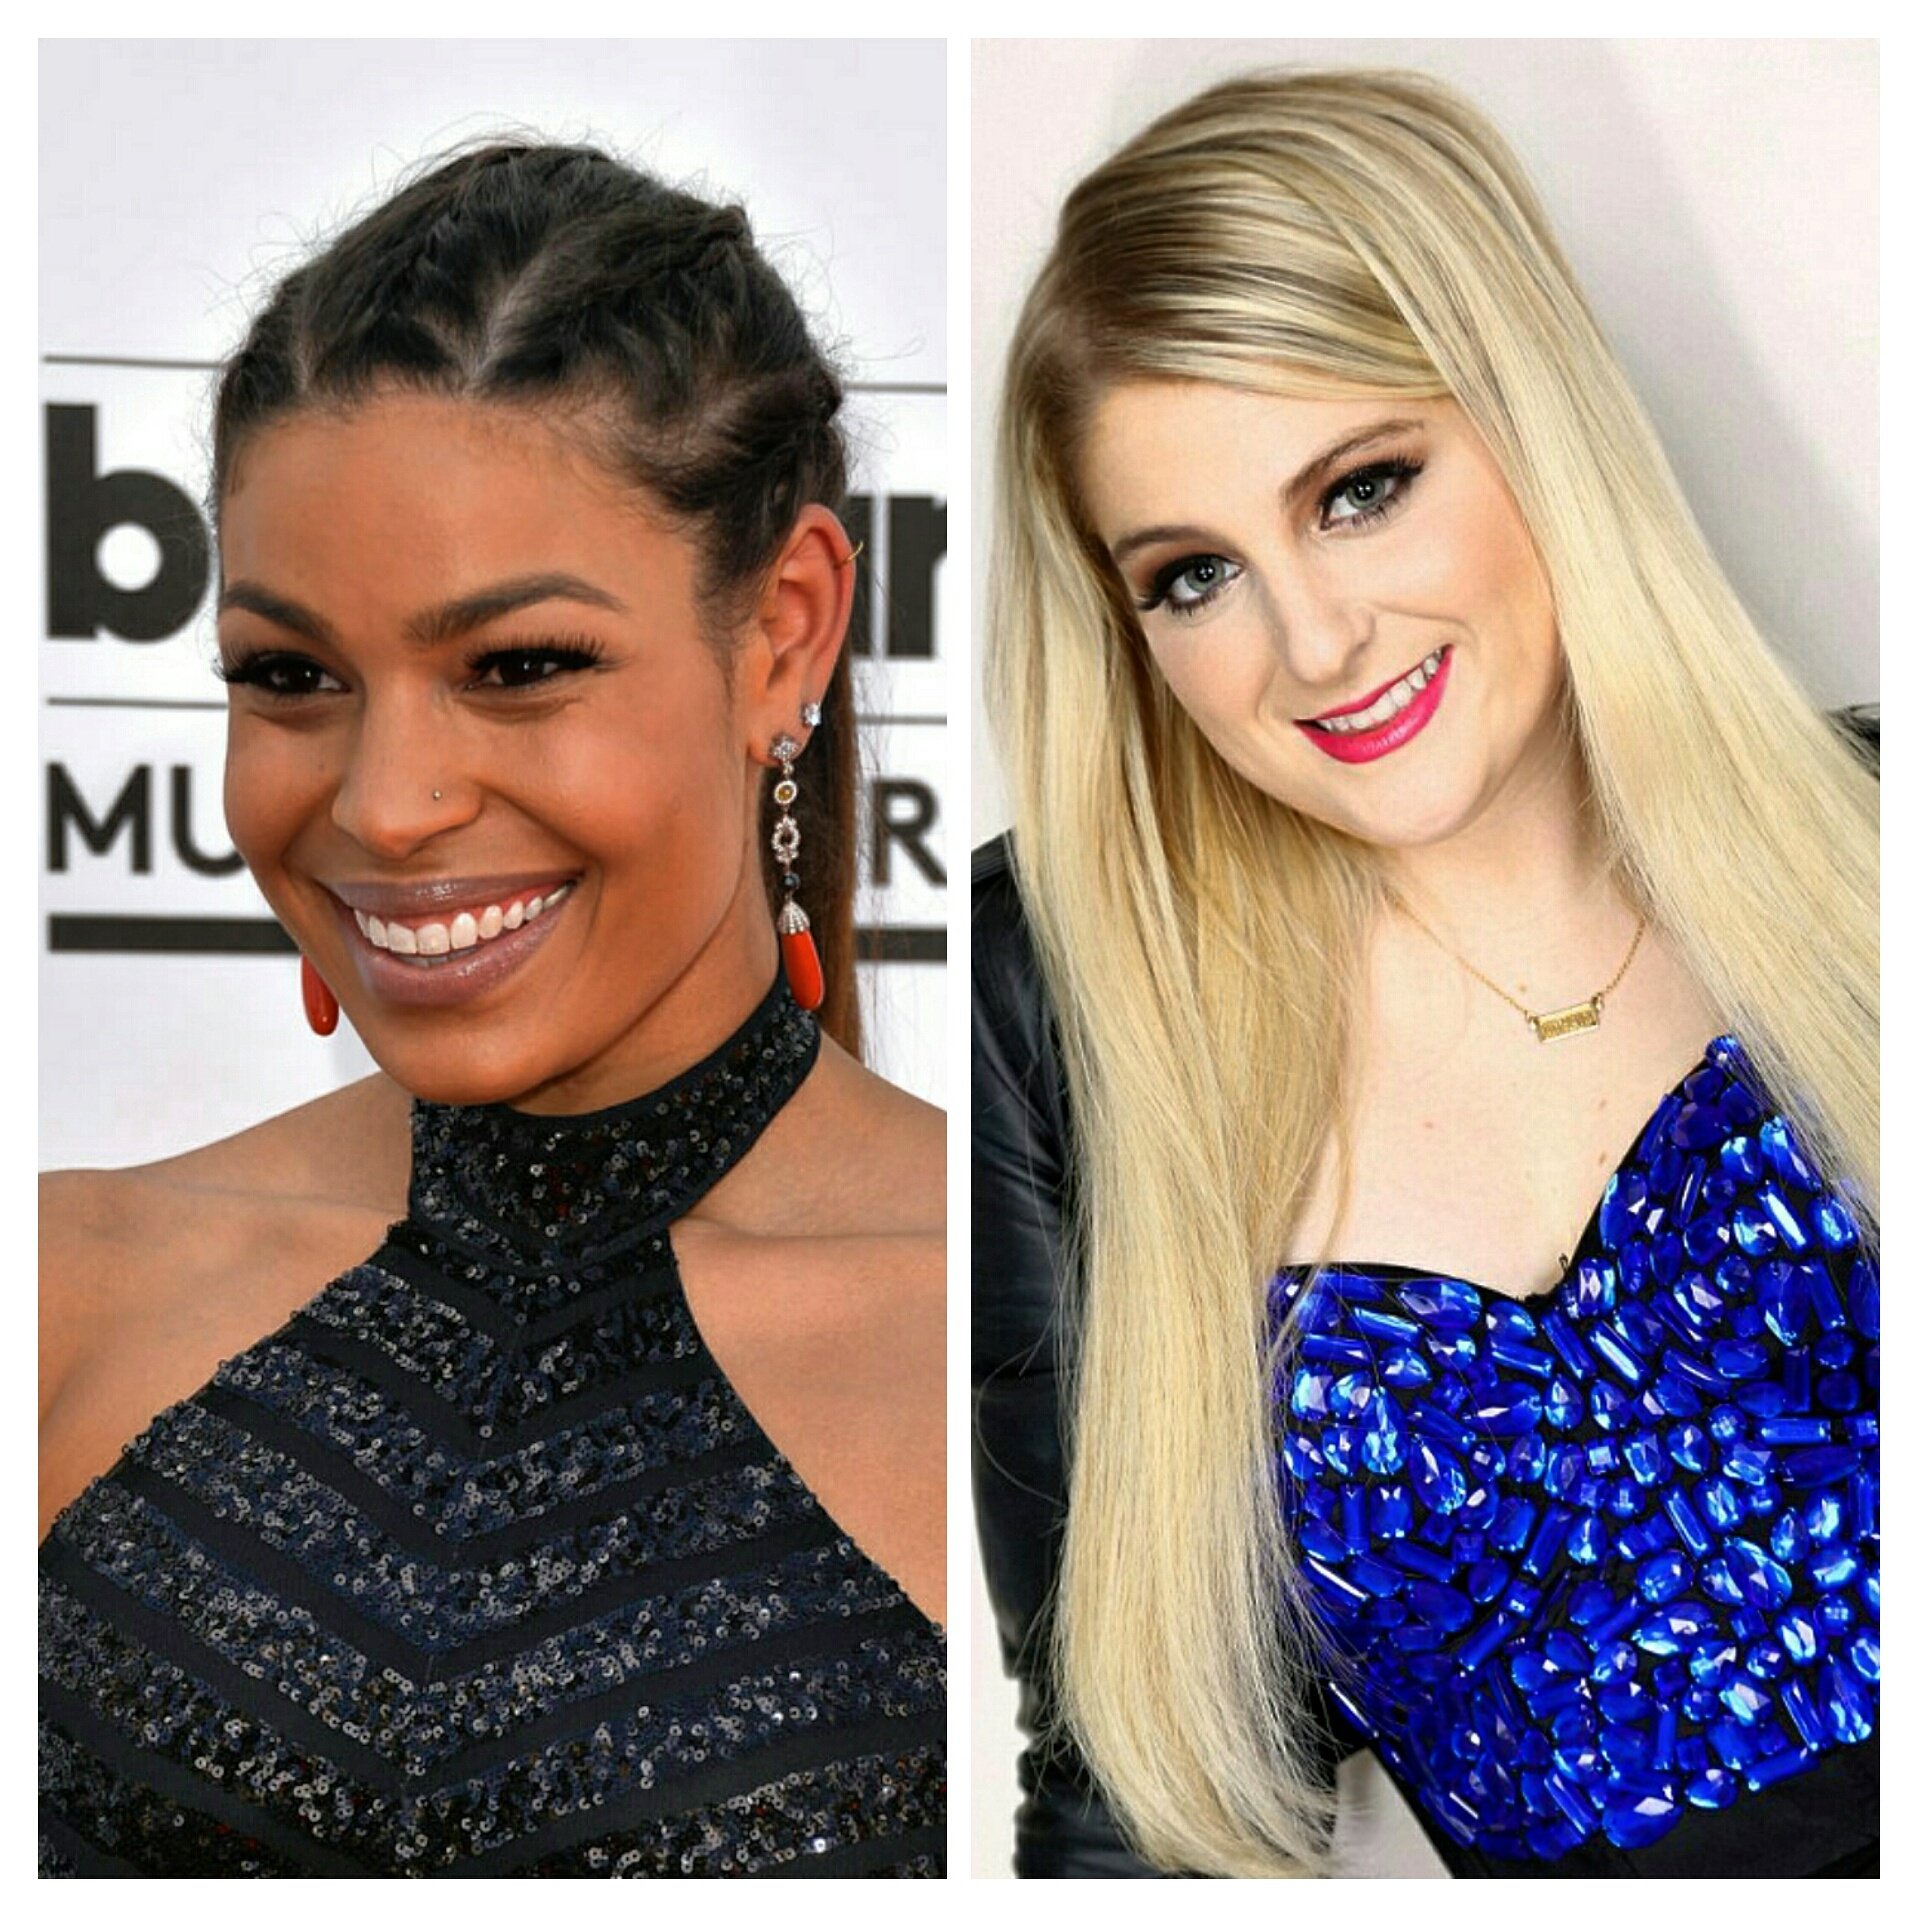 Happy 26th birthday to Jordin Sparks and happy 22nd to Meghan Trainor! - Kati   